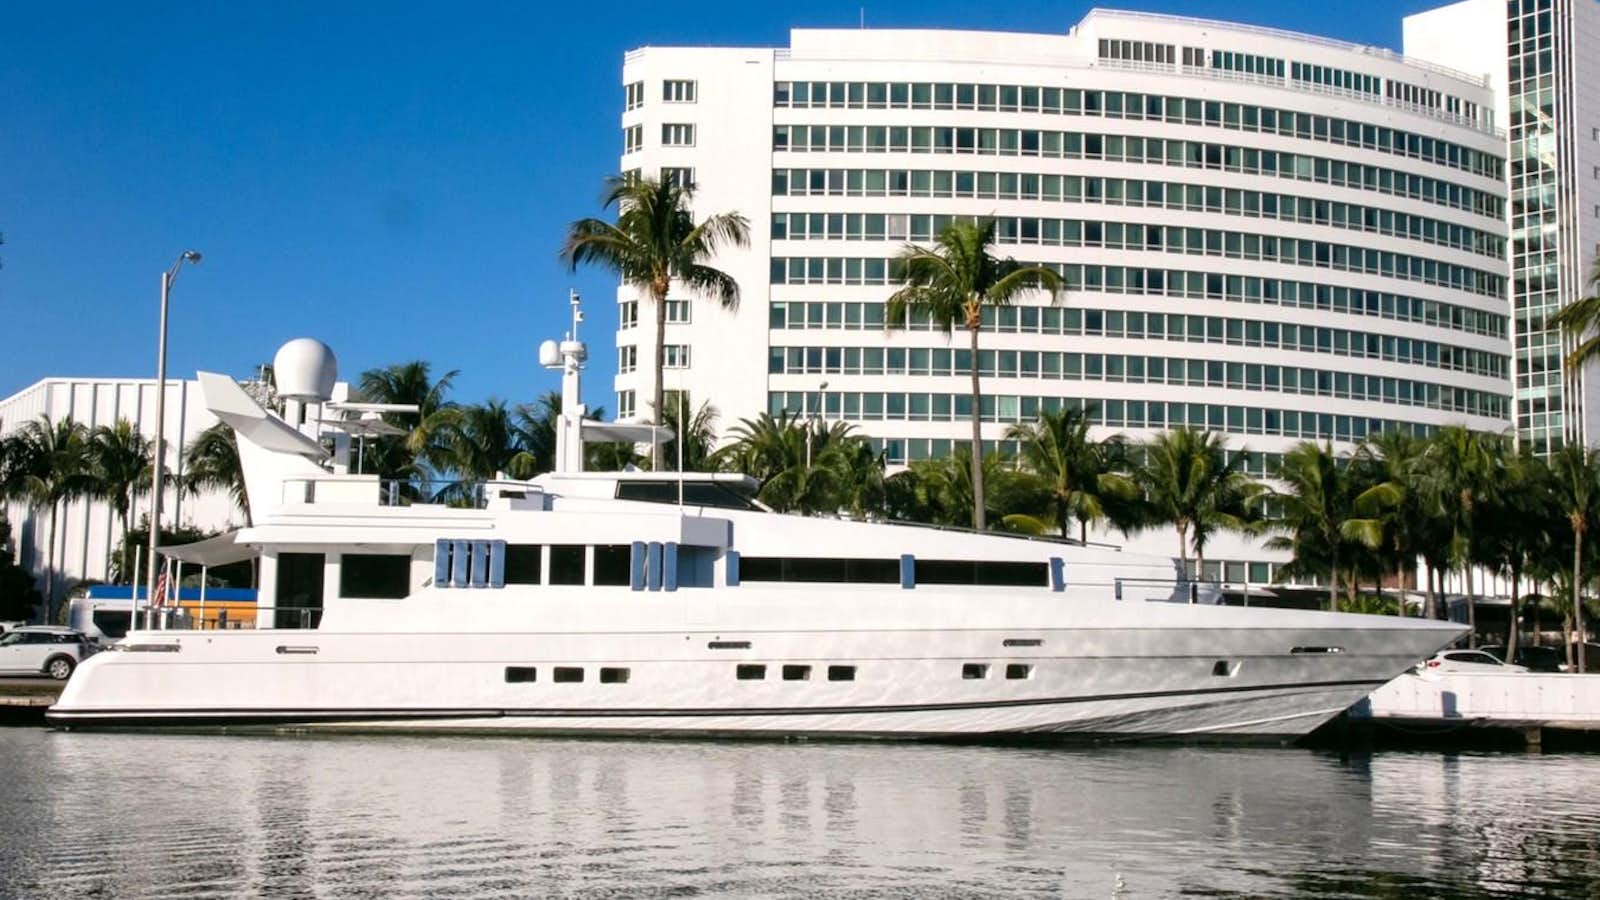 Watch Video for HIGHLINE Yacht for Sale